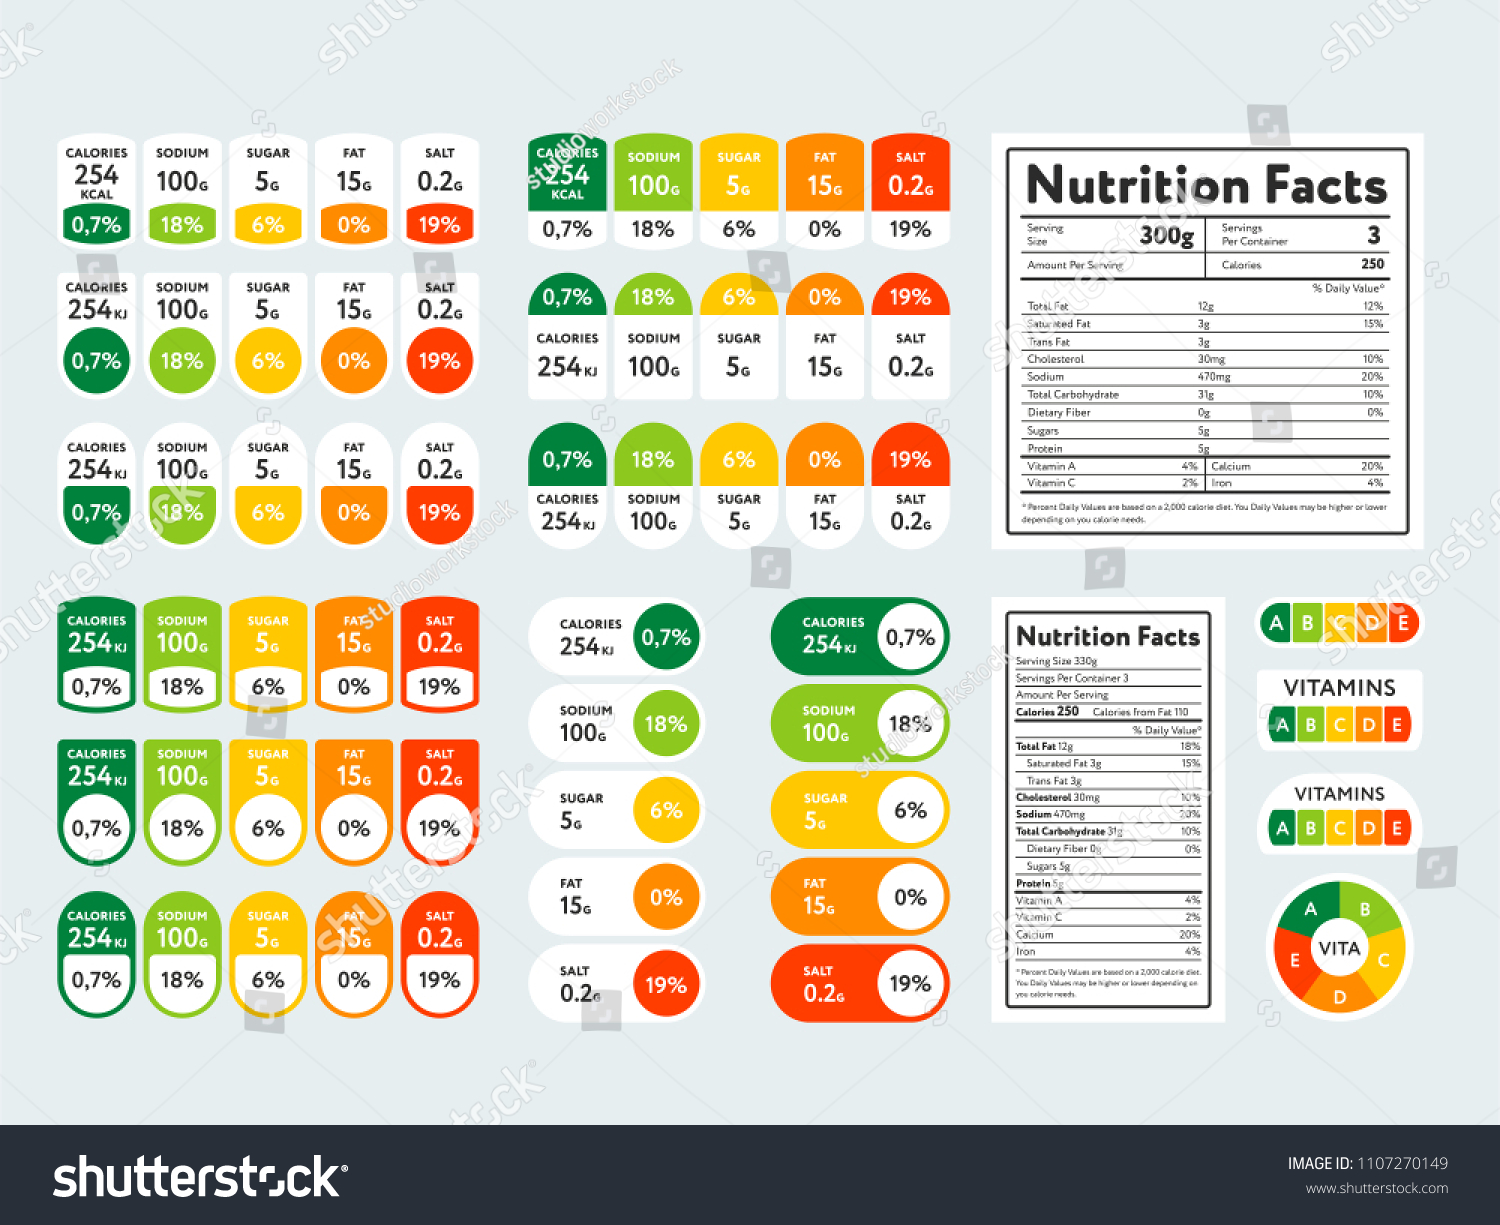 Composed labels of nutritional facts and micronutrients in tablets and colorful tags #1107270149